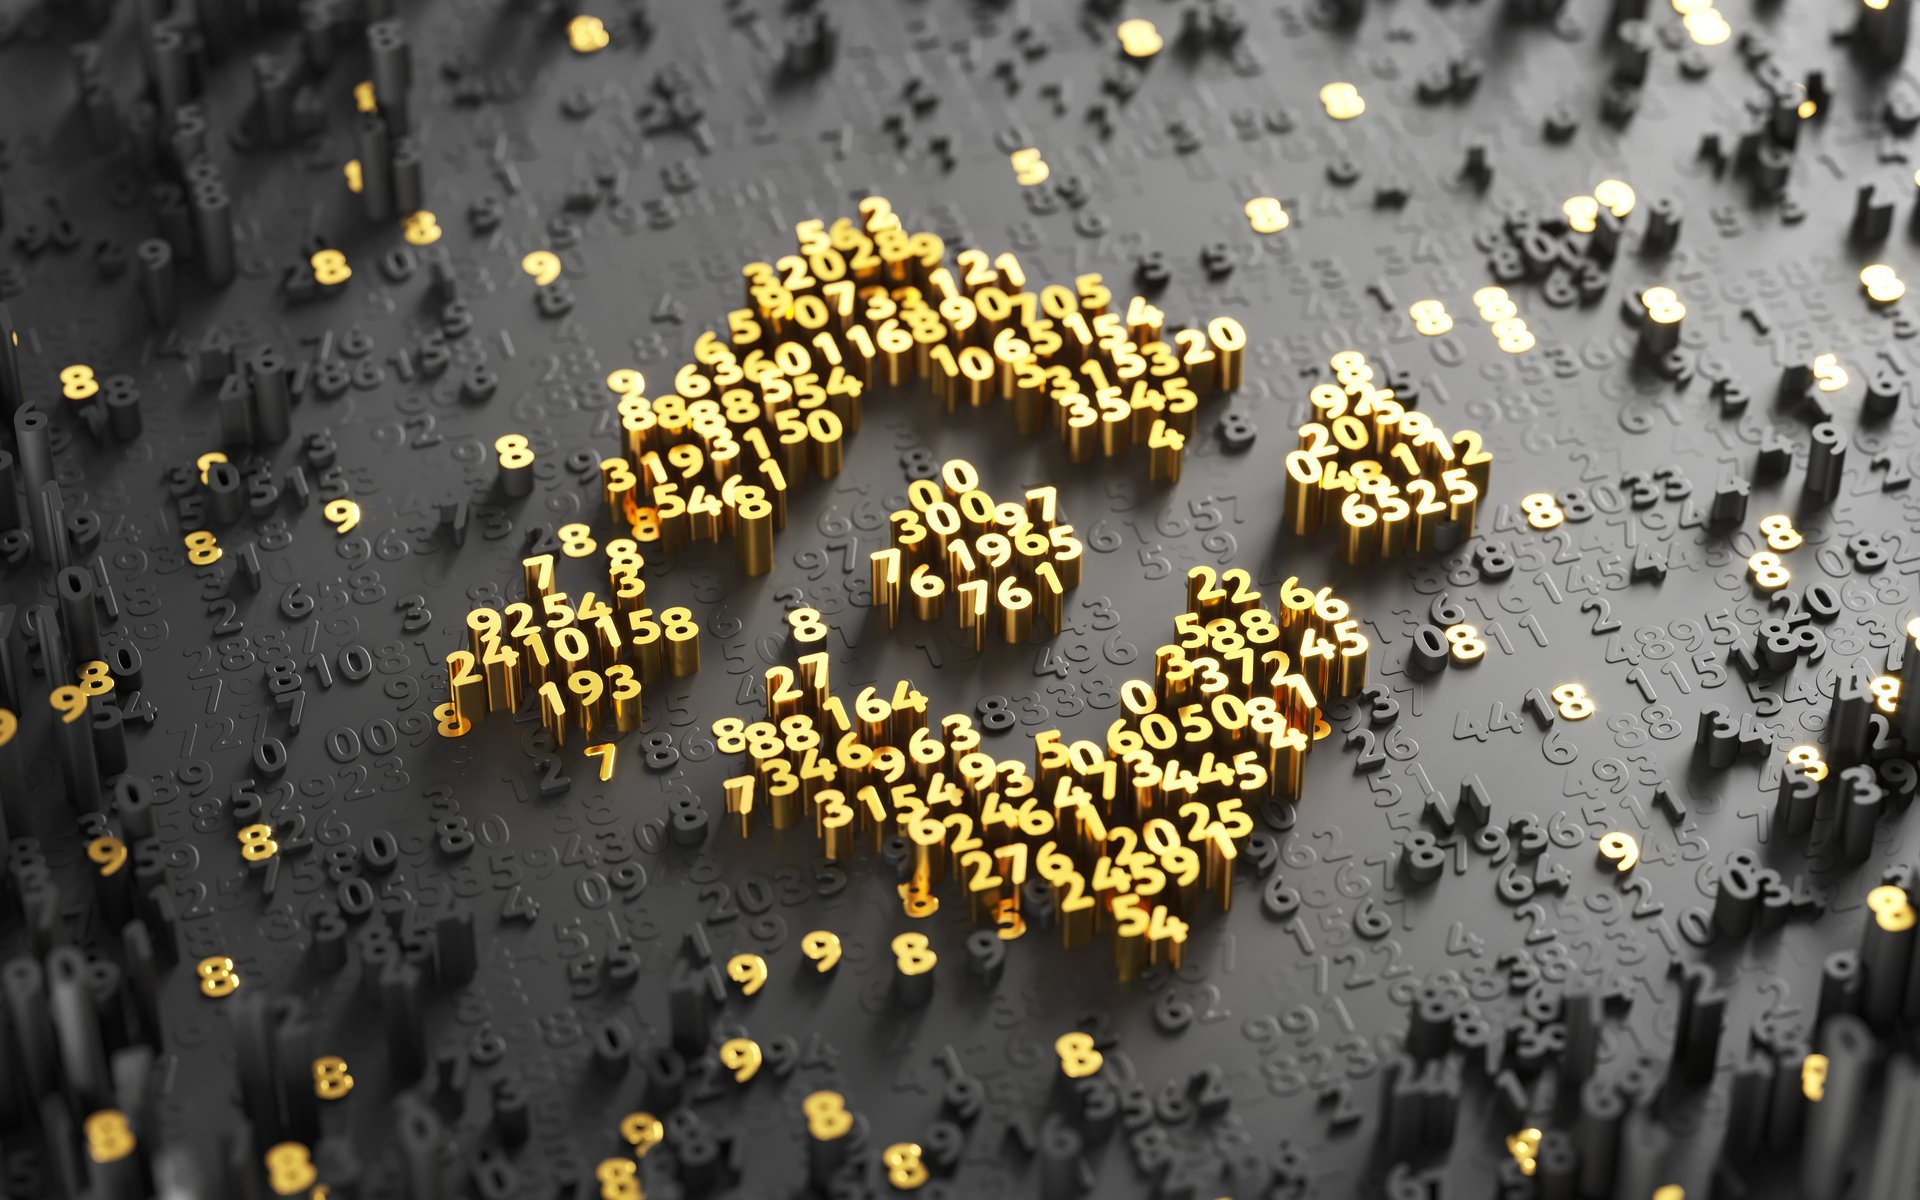 Binance Launches Donations Portal Based On The Blockchain